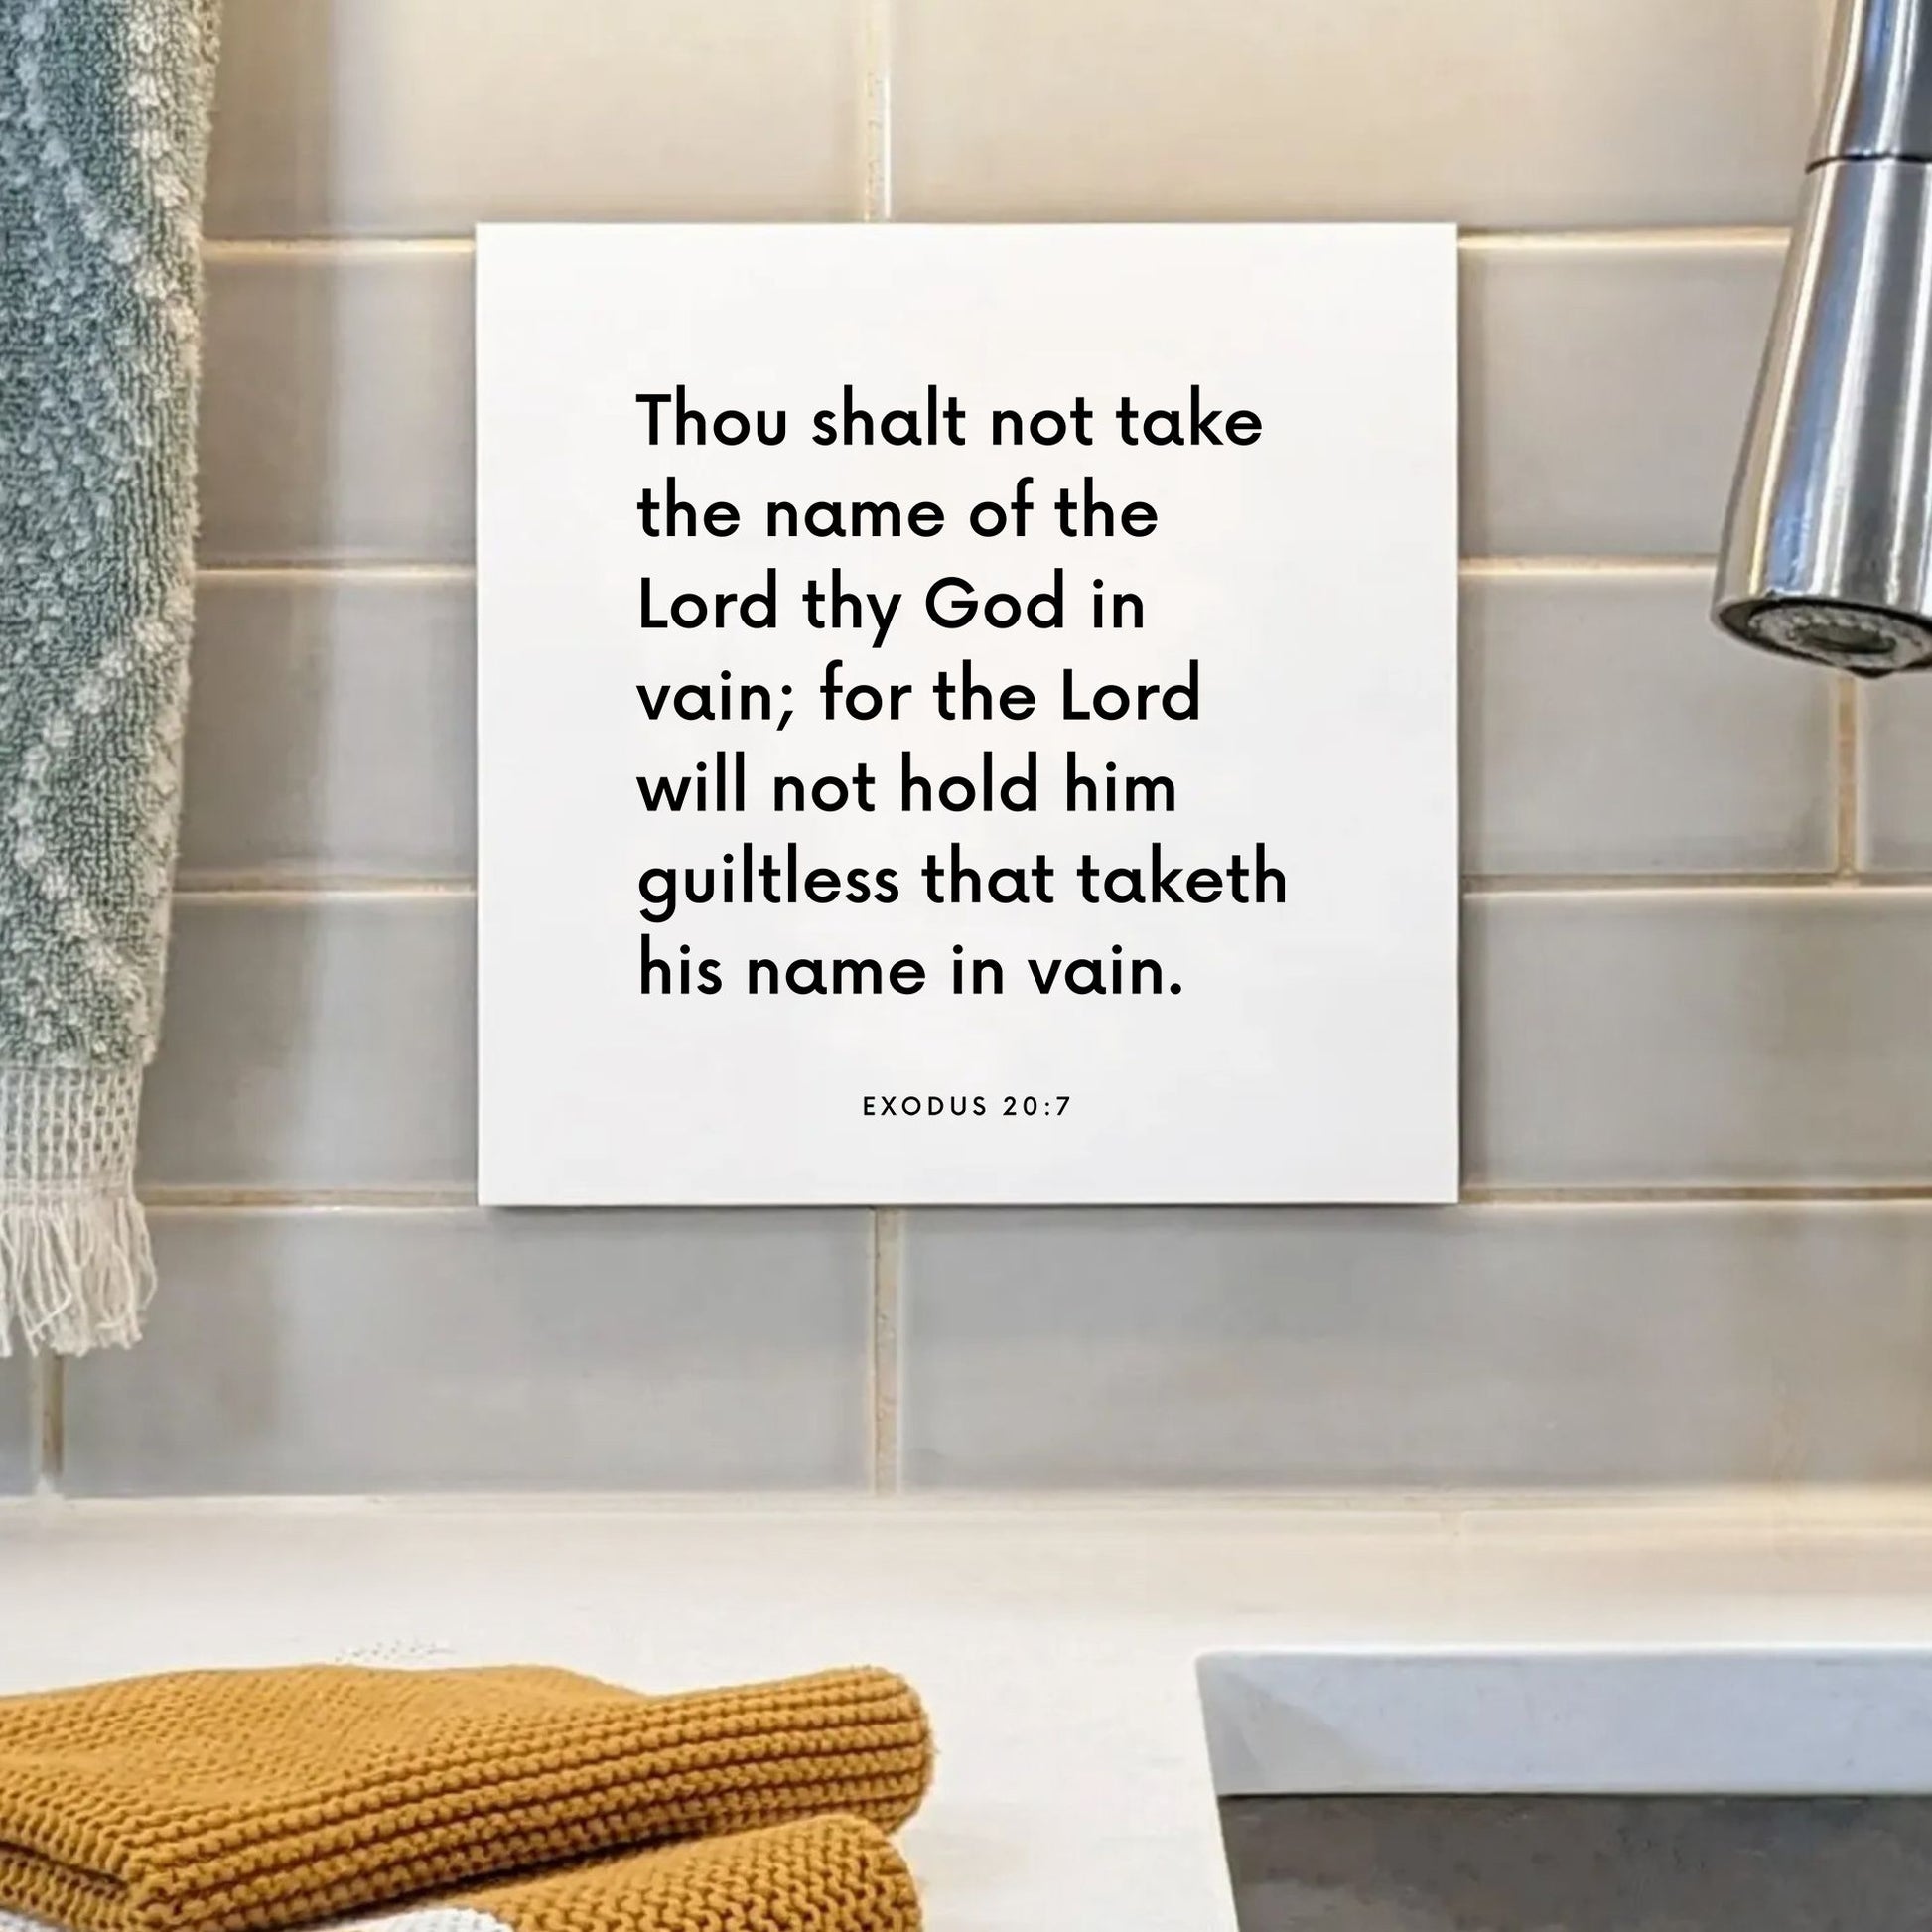 Sink mouting of the scripture tile for Exodus 20:7 - "Thou shalt not take the name of the Lord thy God in vain"